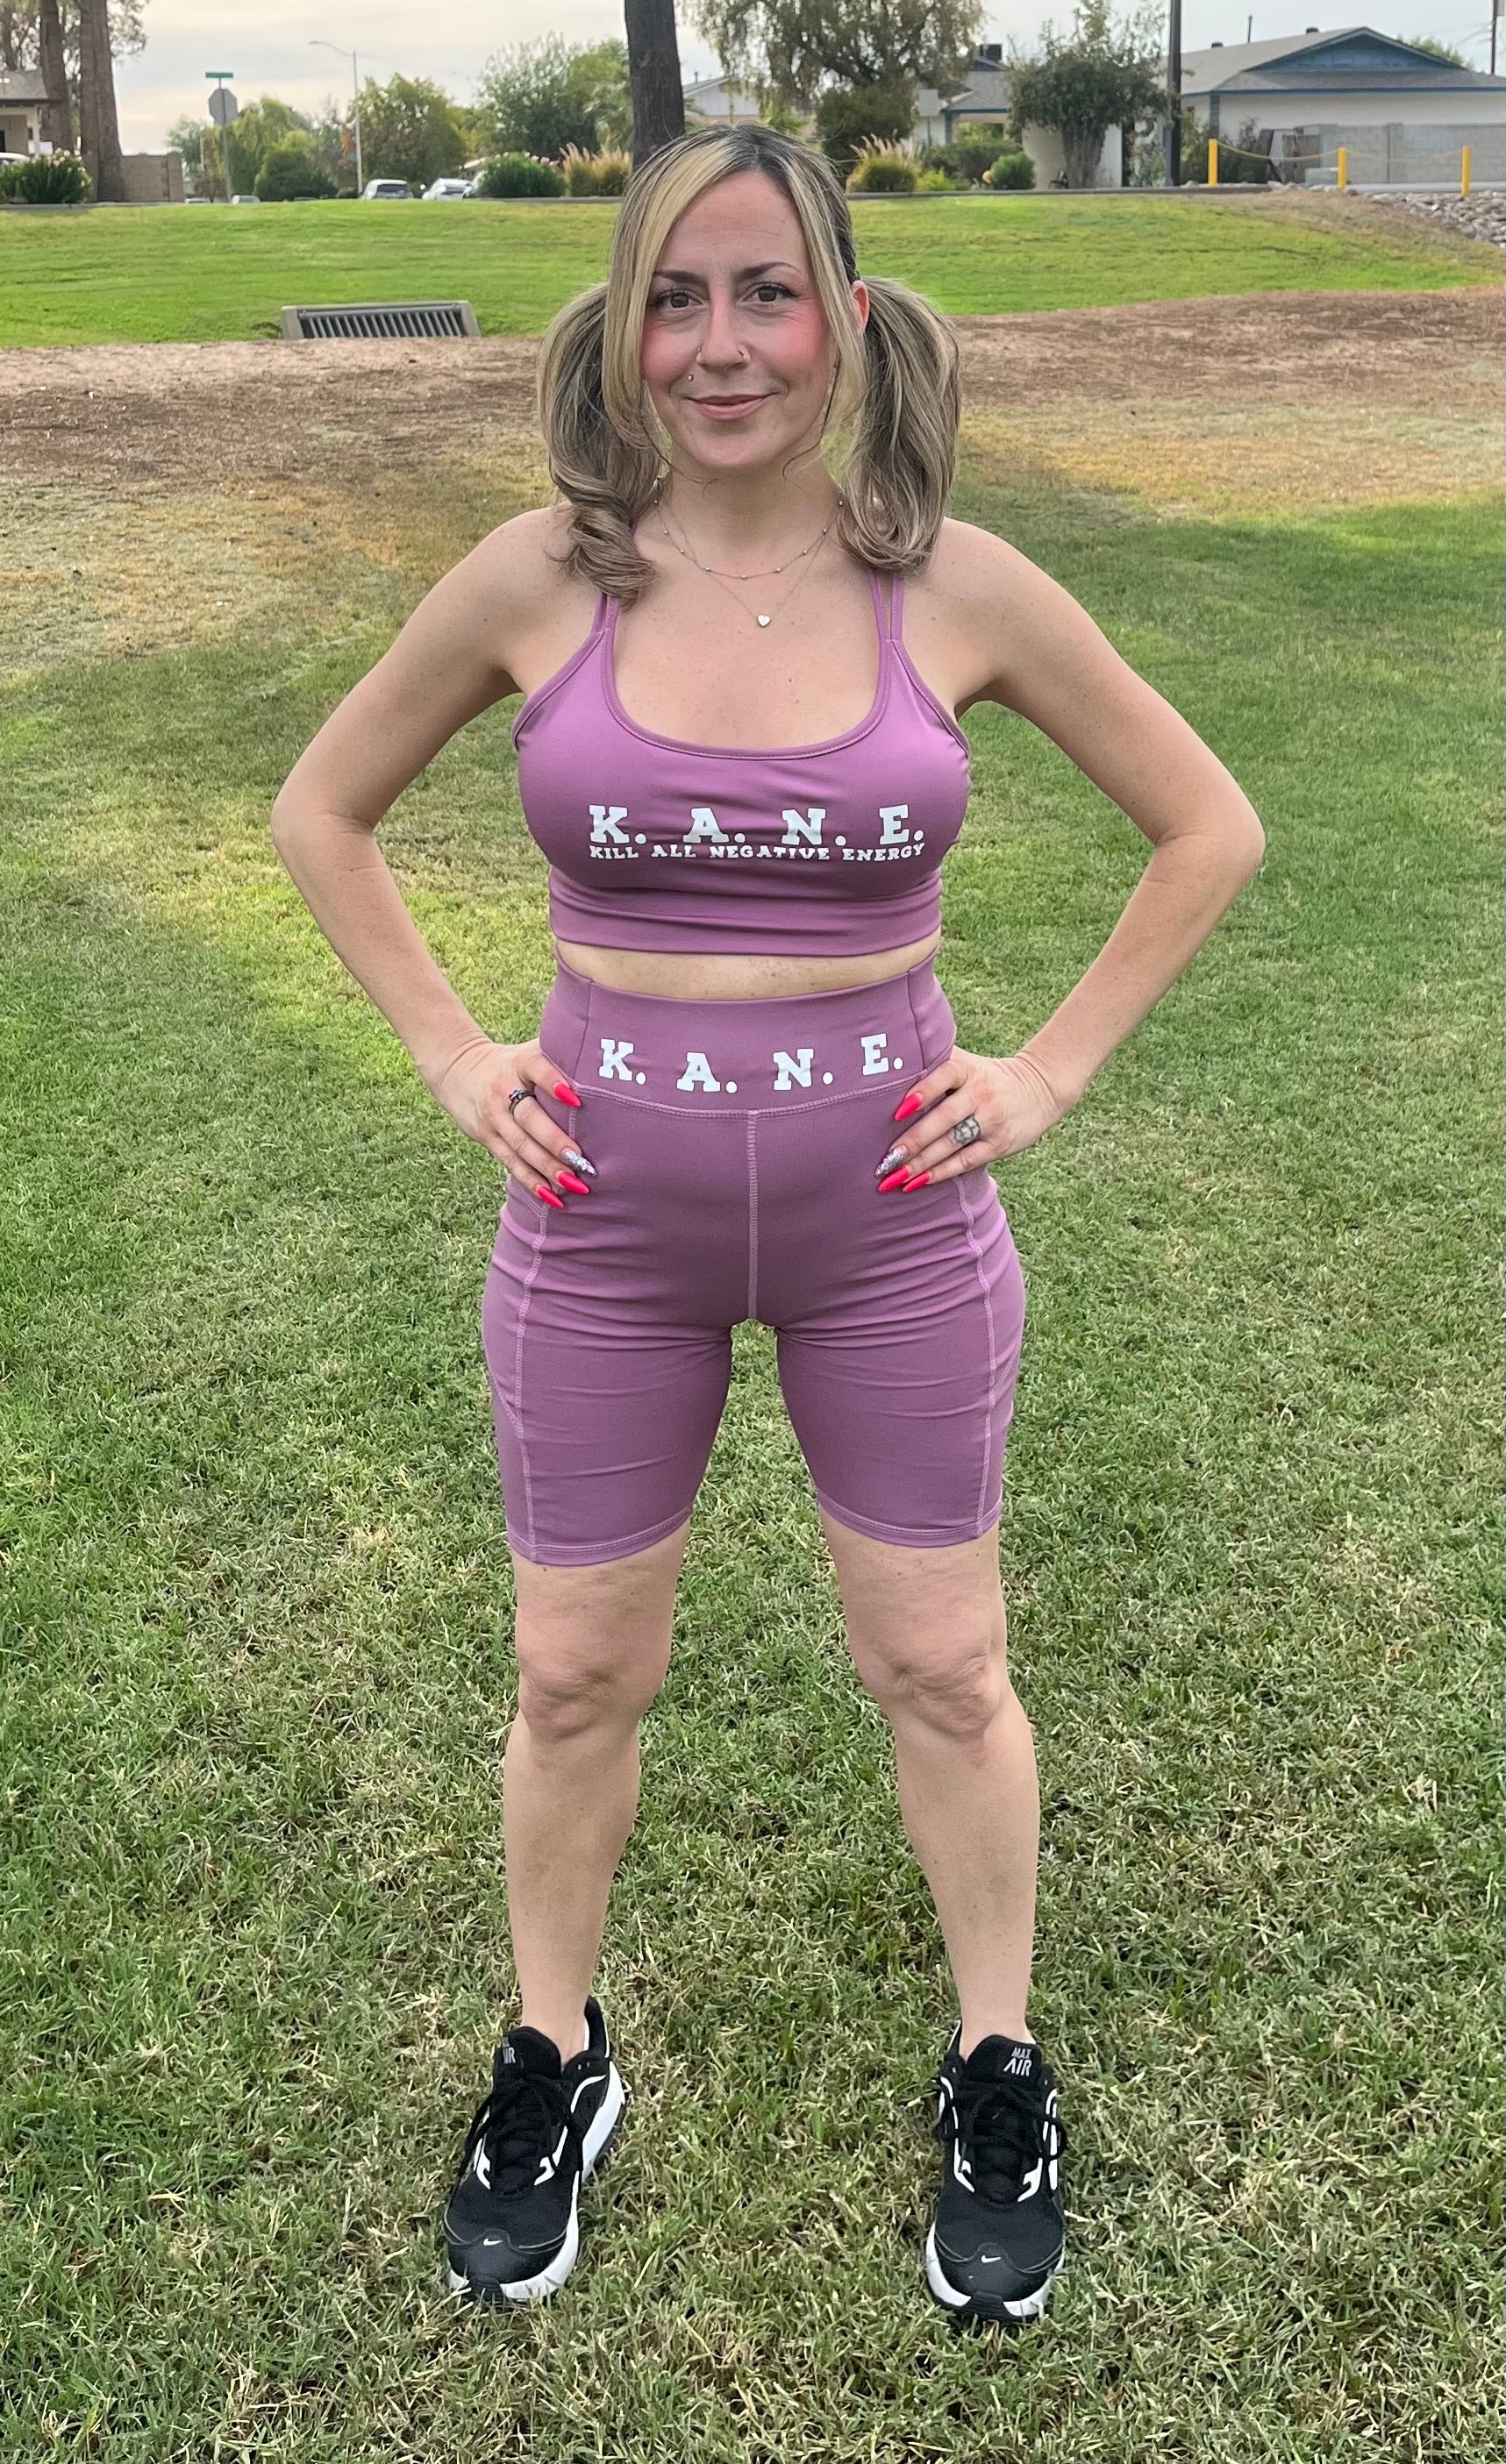 Sports bra with shorts – K.A.N.E.